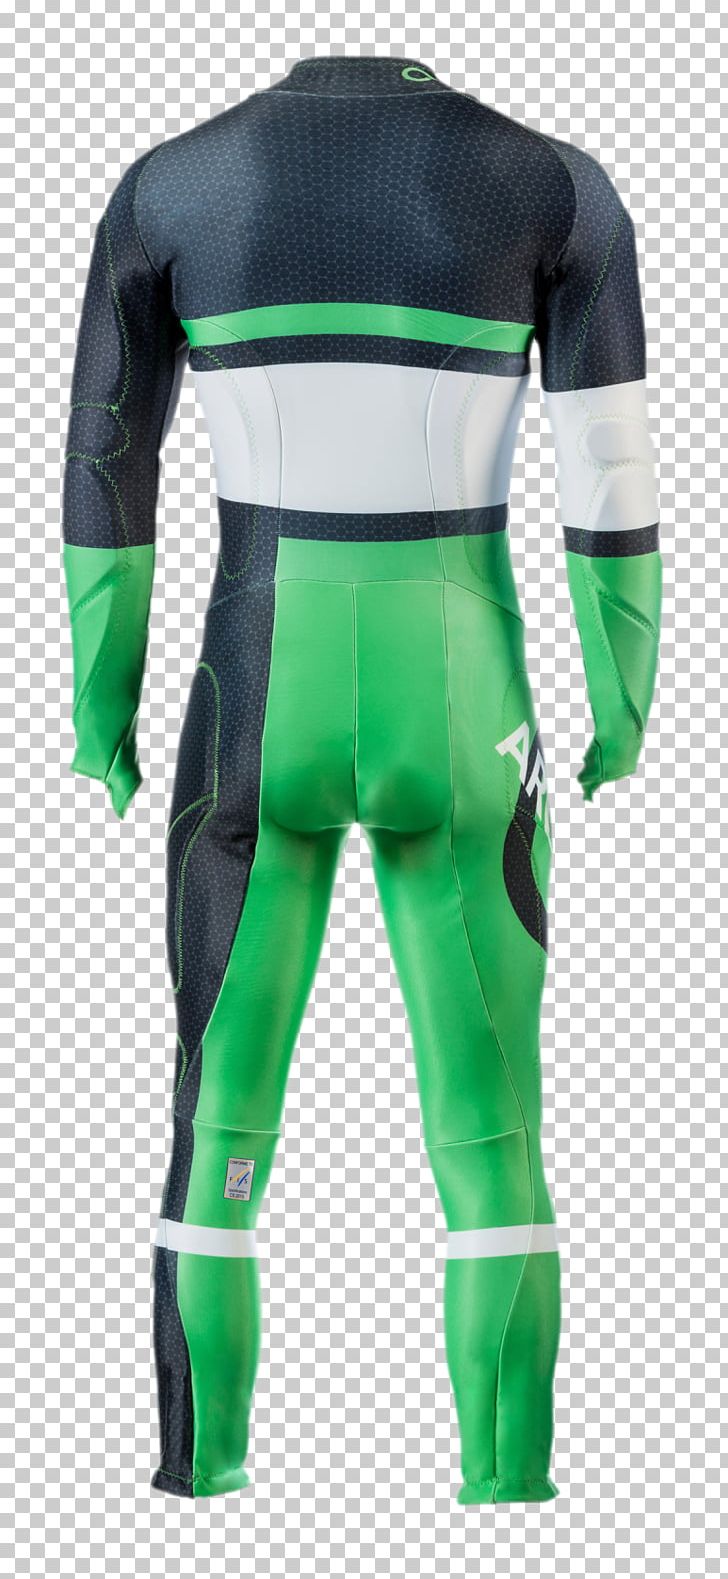 Wetsuit Dry Suit Spandex Textile PNG, Clipart, Dry Suit, Green, Others, Personal Protective Equipment, Sleeve Free PNG Download